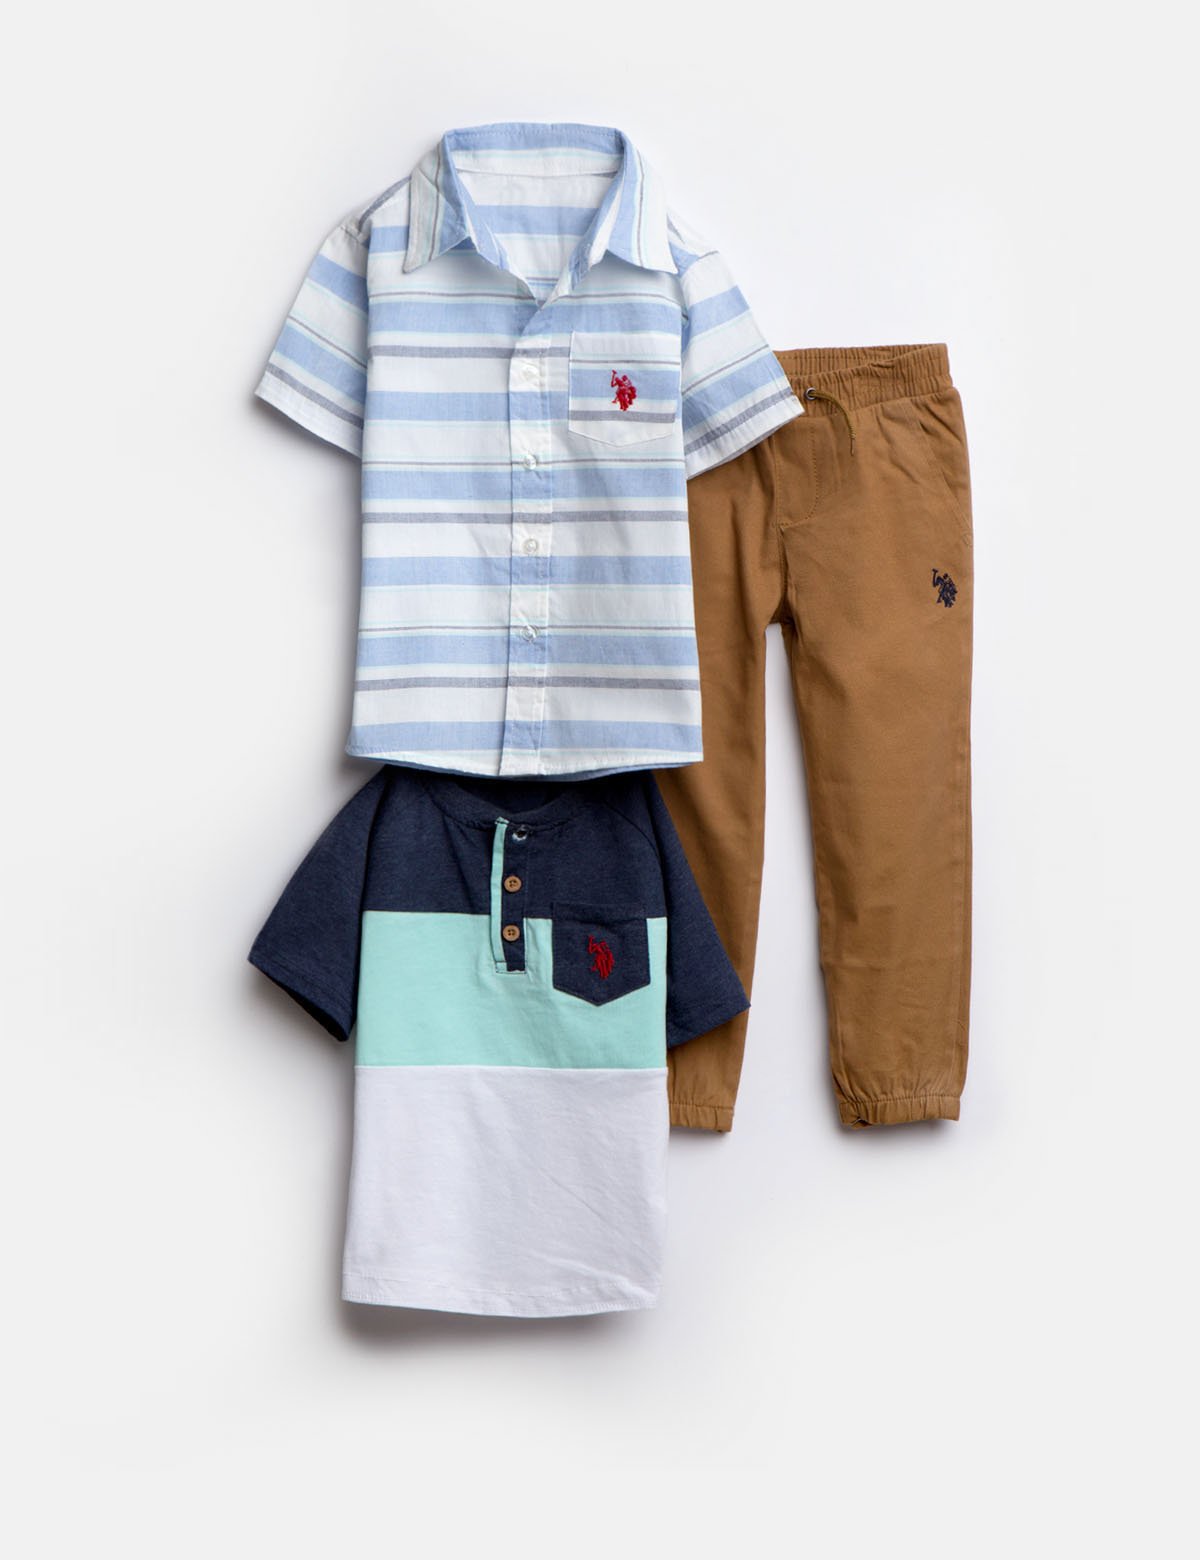 polo outfits for toddlers